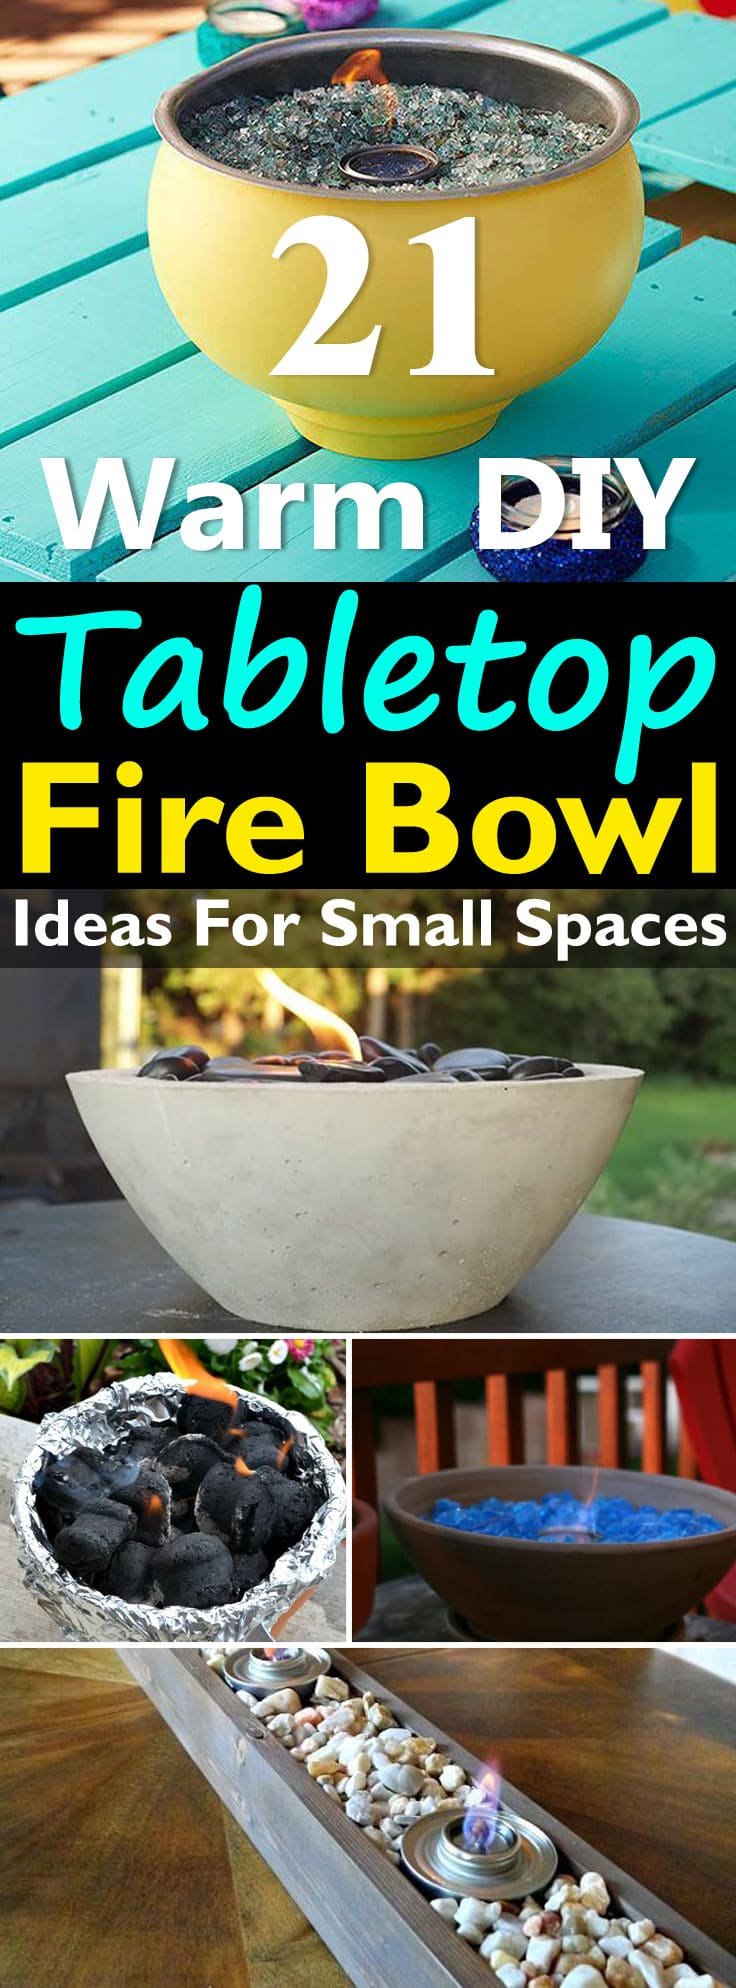 You can create your own nice little fire pits that are warm, portable and suitable for urban dwellers, following these 21 DIY Tabletop Fire Bowl Ideas!